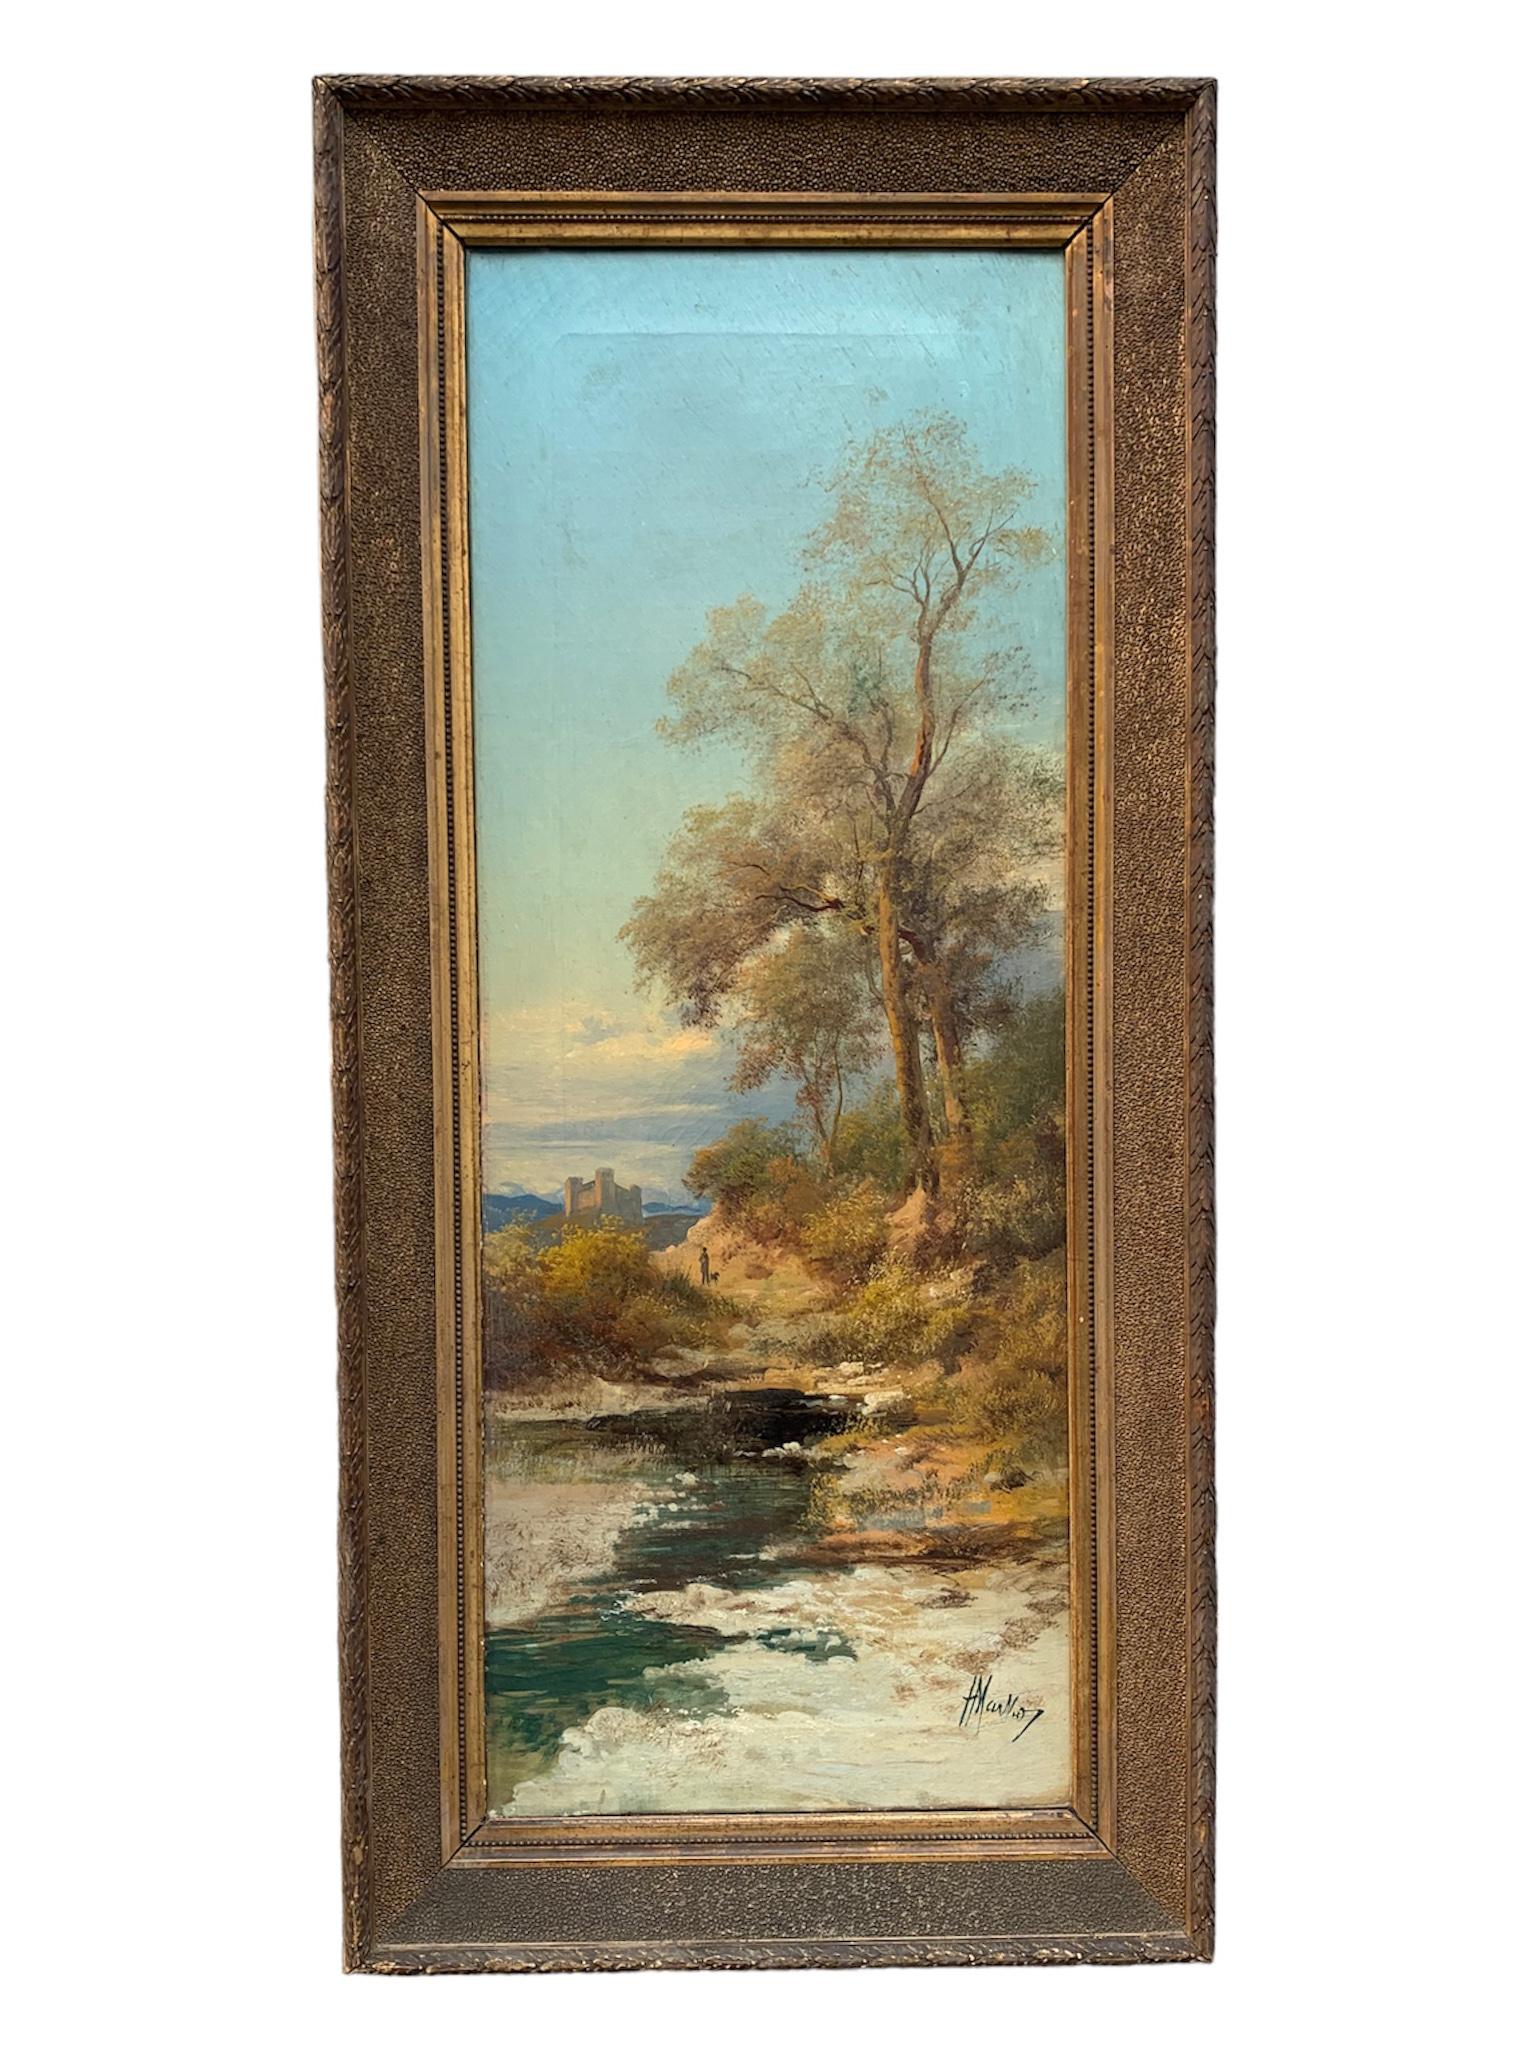 Oil painting on canvas depicting a natural autumn landscape, created by Henry Markò in the early 20th century.

Ø cm 49 h cm 105

Henry Markò, descendant of the Austrian painting dynasty of Andrea Markò, was born in Florence in 1855. His works